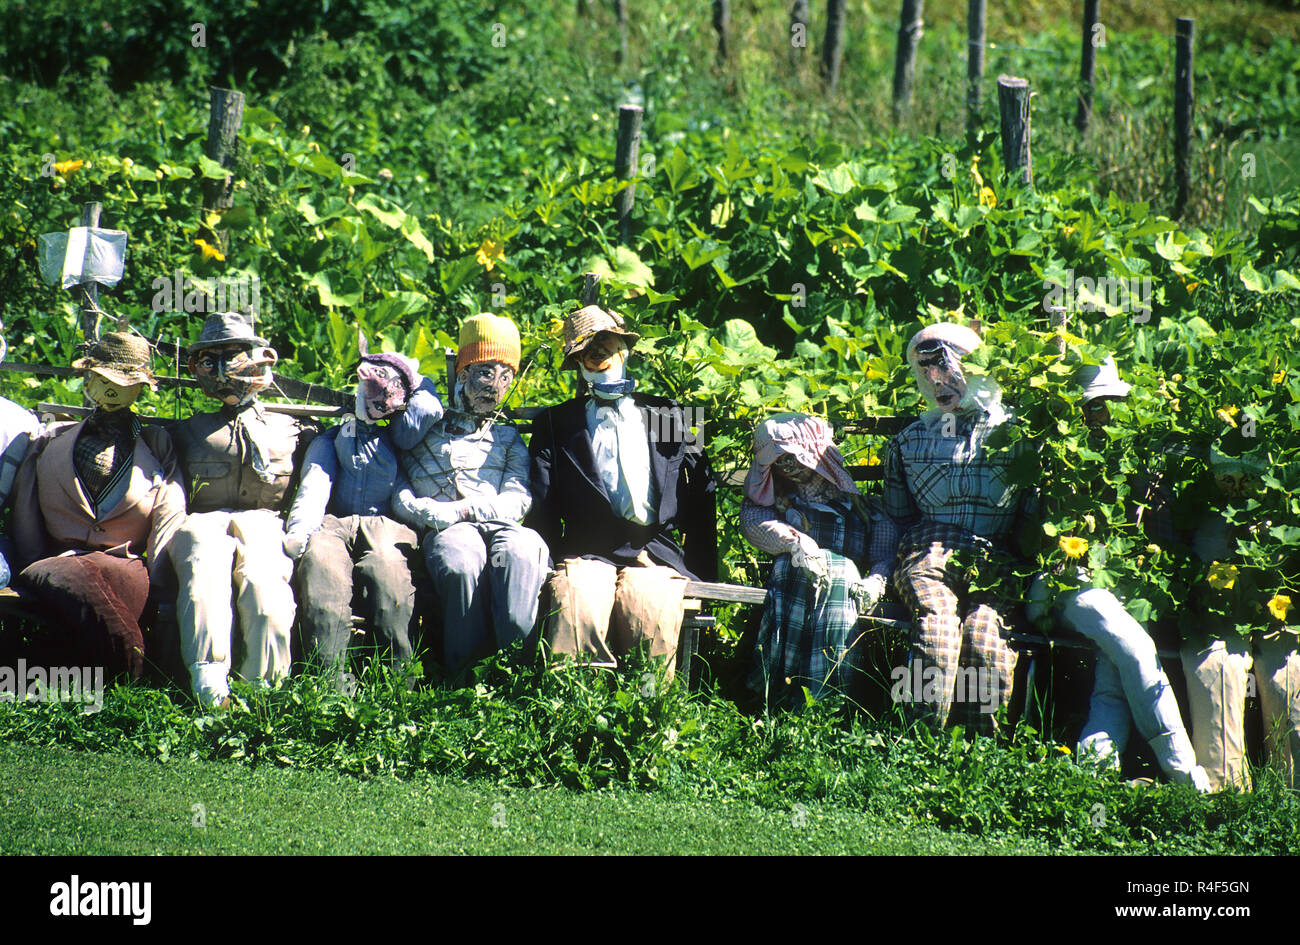 Scarecrows front a garden in northern Maine, USA Stock Photo